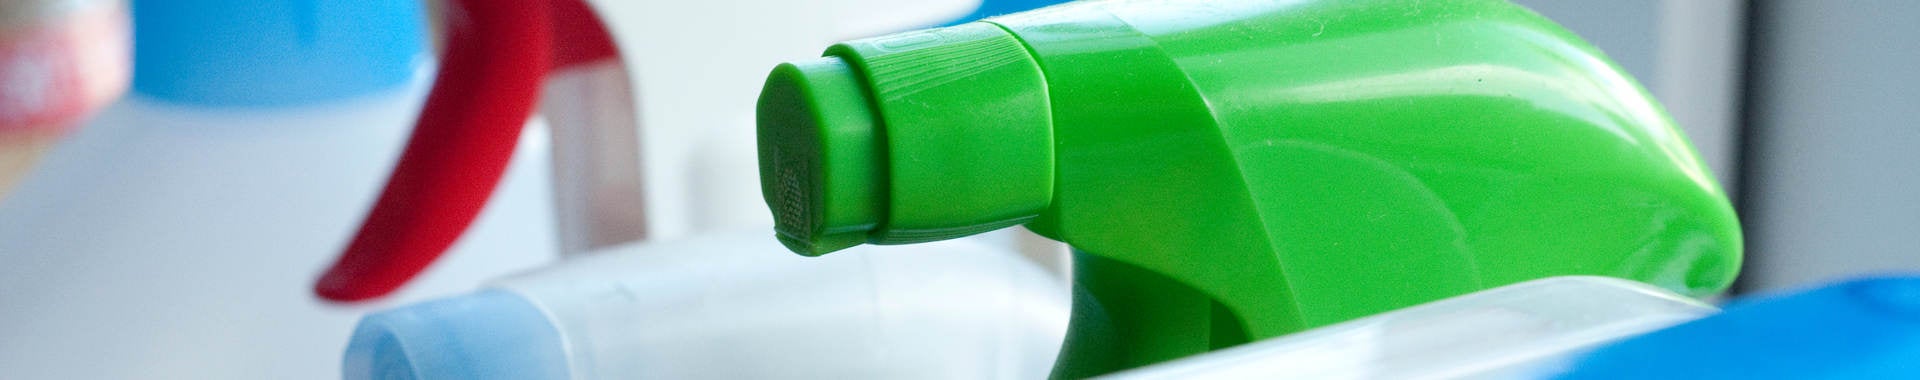 Cleaning solutions in spray bottles